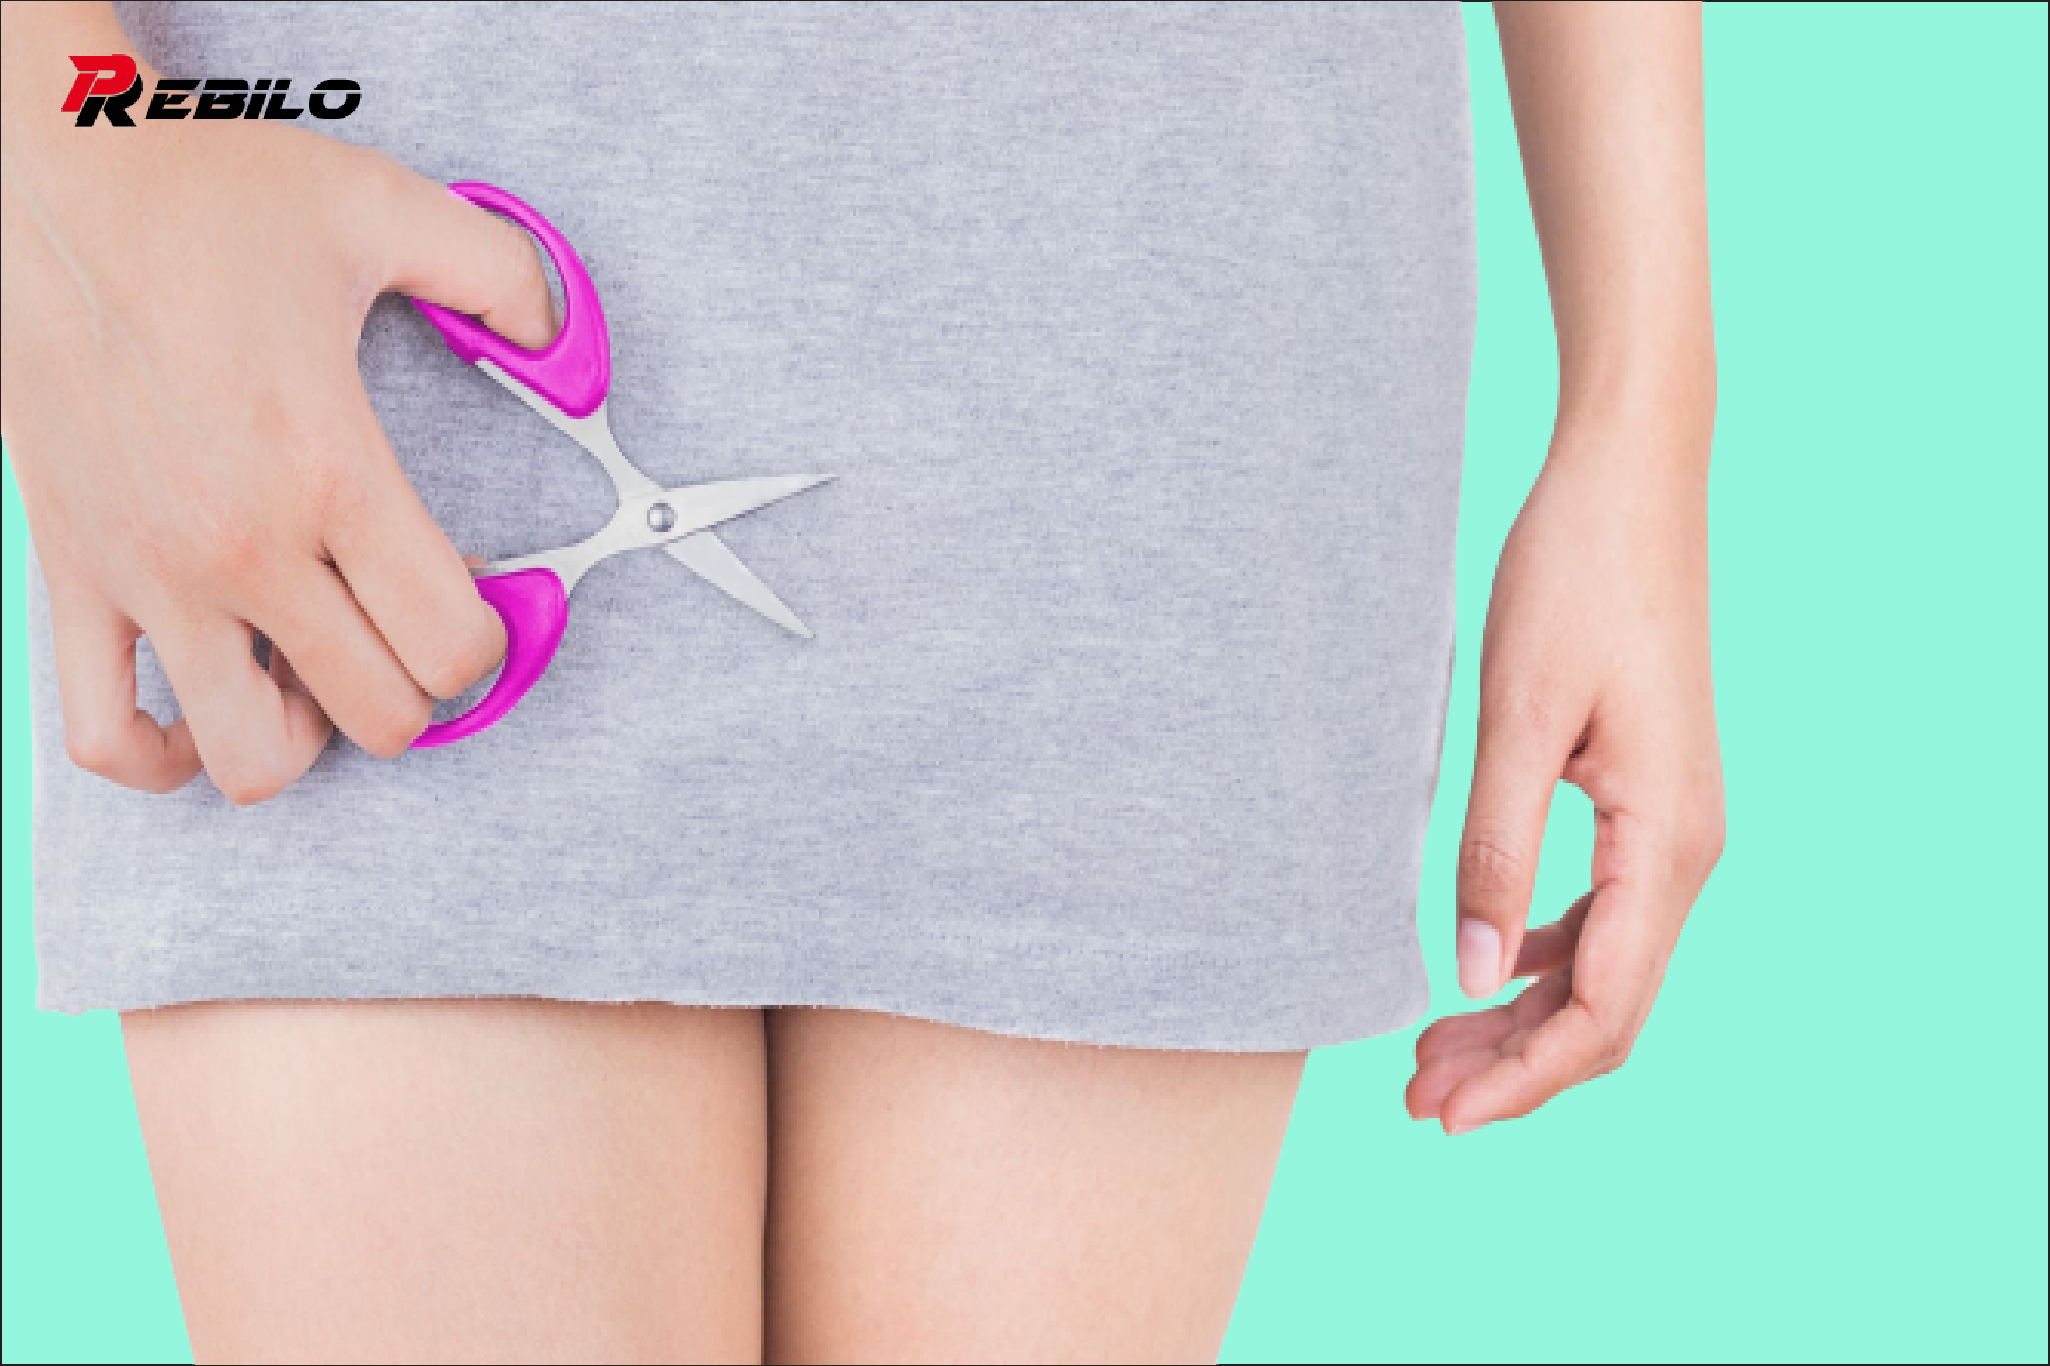 Here are 7 reasons why you should not shave your pubic hair